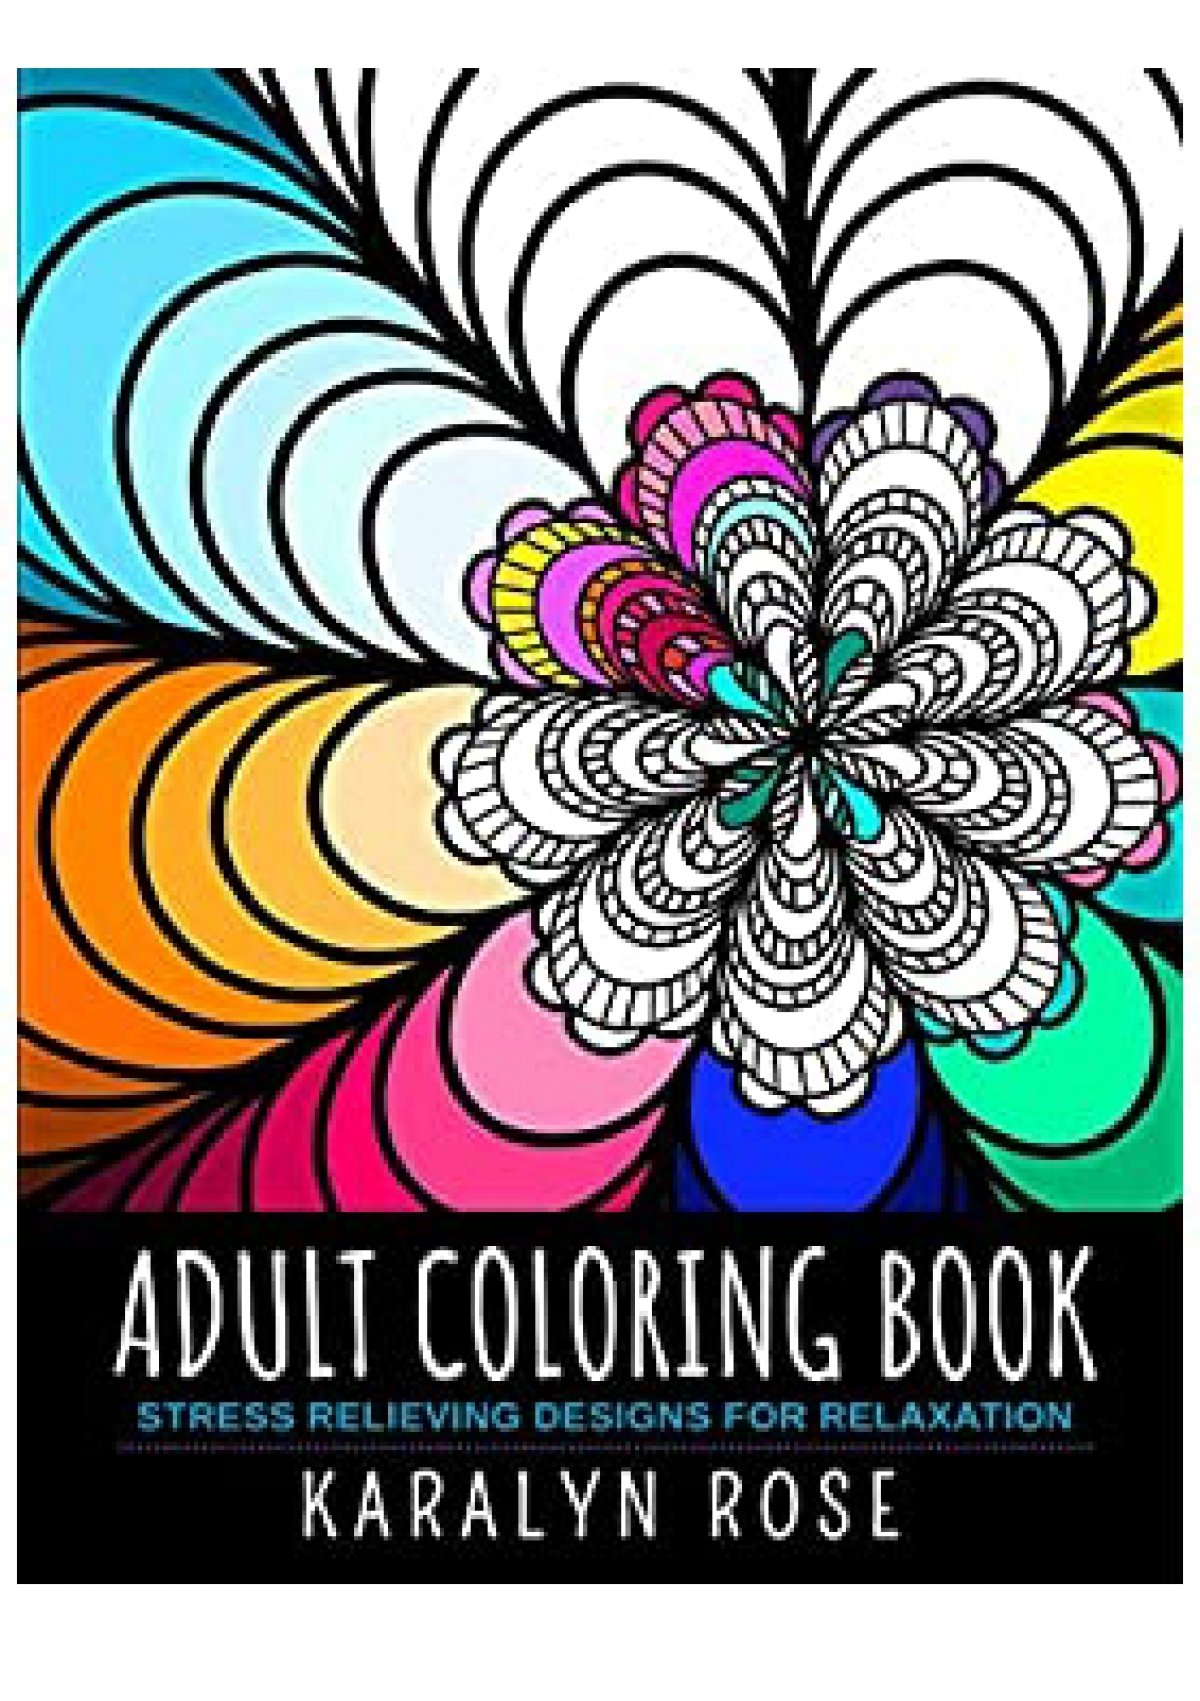 Download Free Download Read Adult Coloring Book Stress Relieving Designs For Relaxation Stress Relieving Coloring Books Ebook Pdf